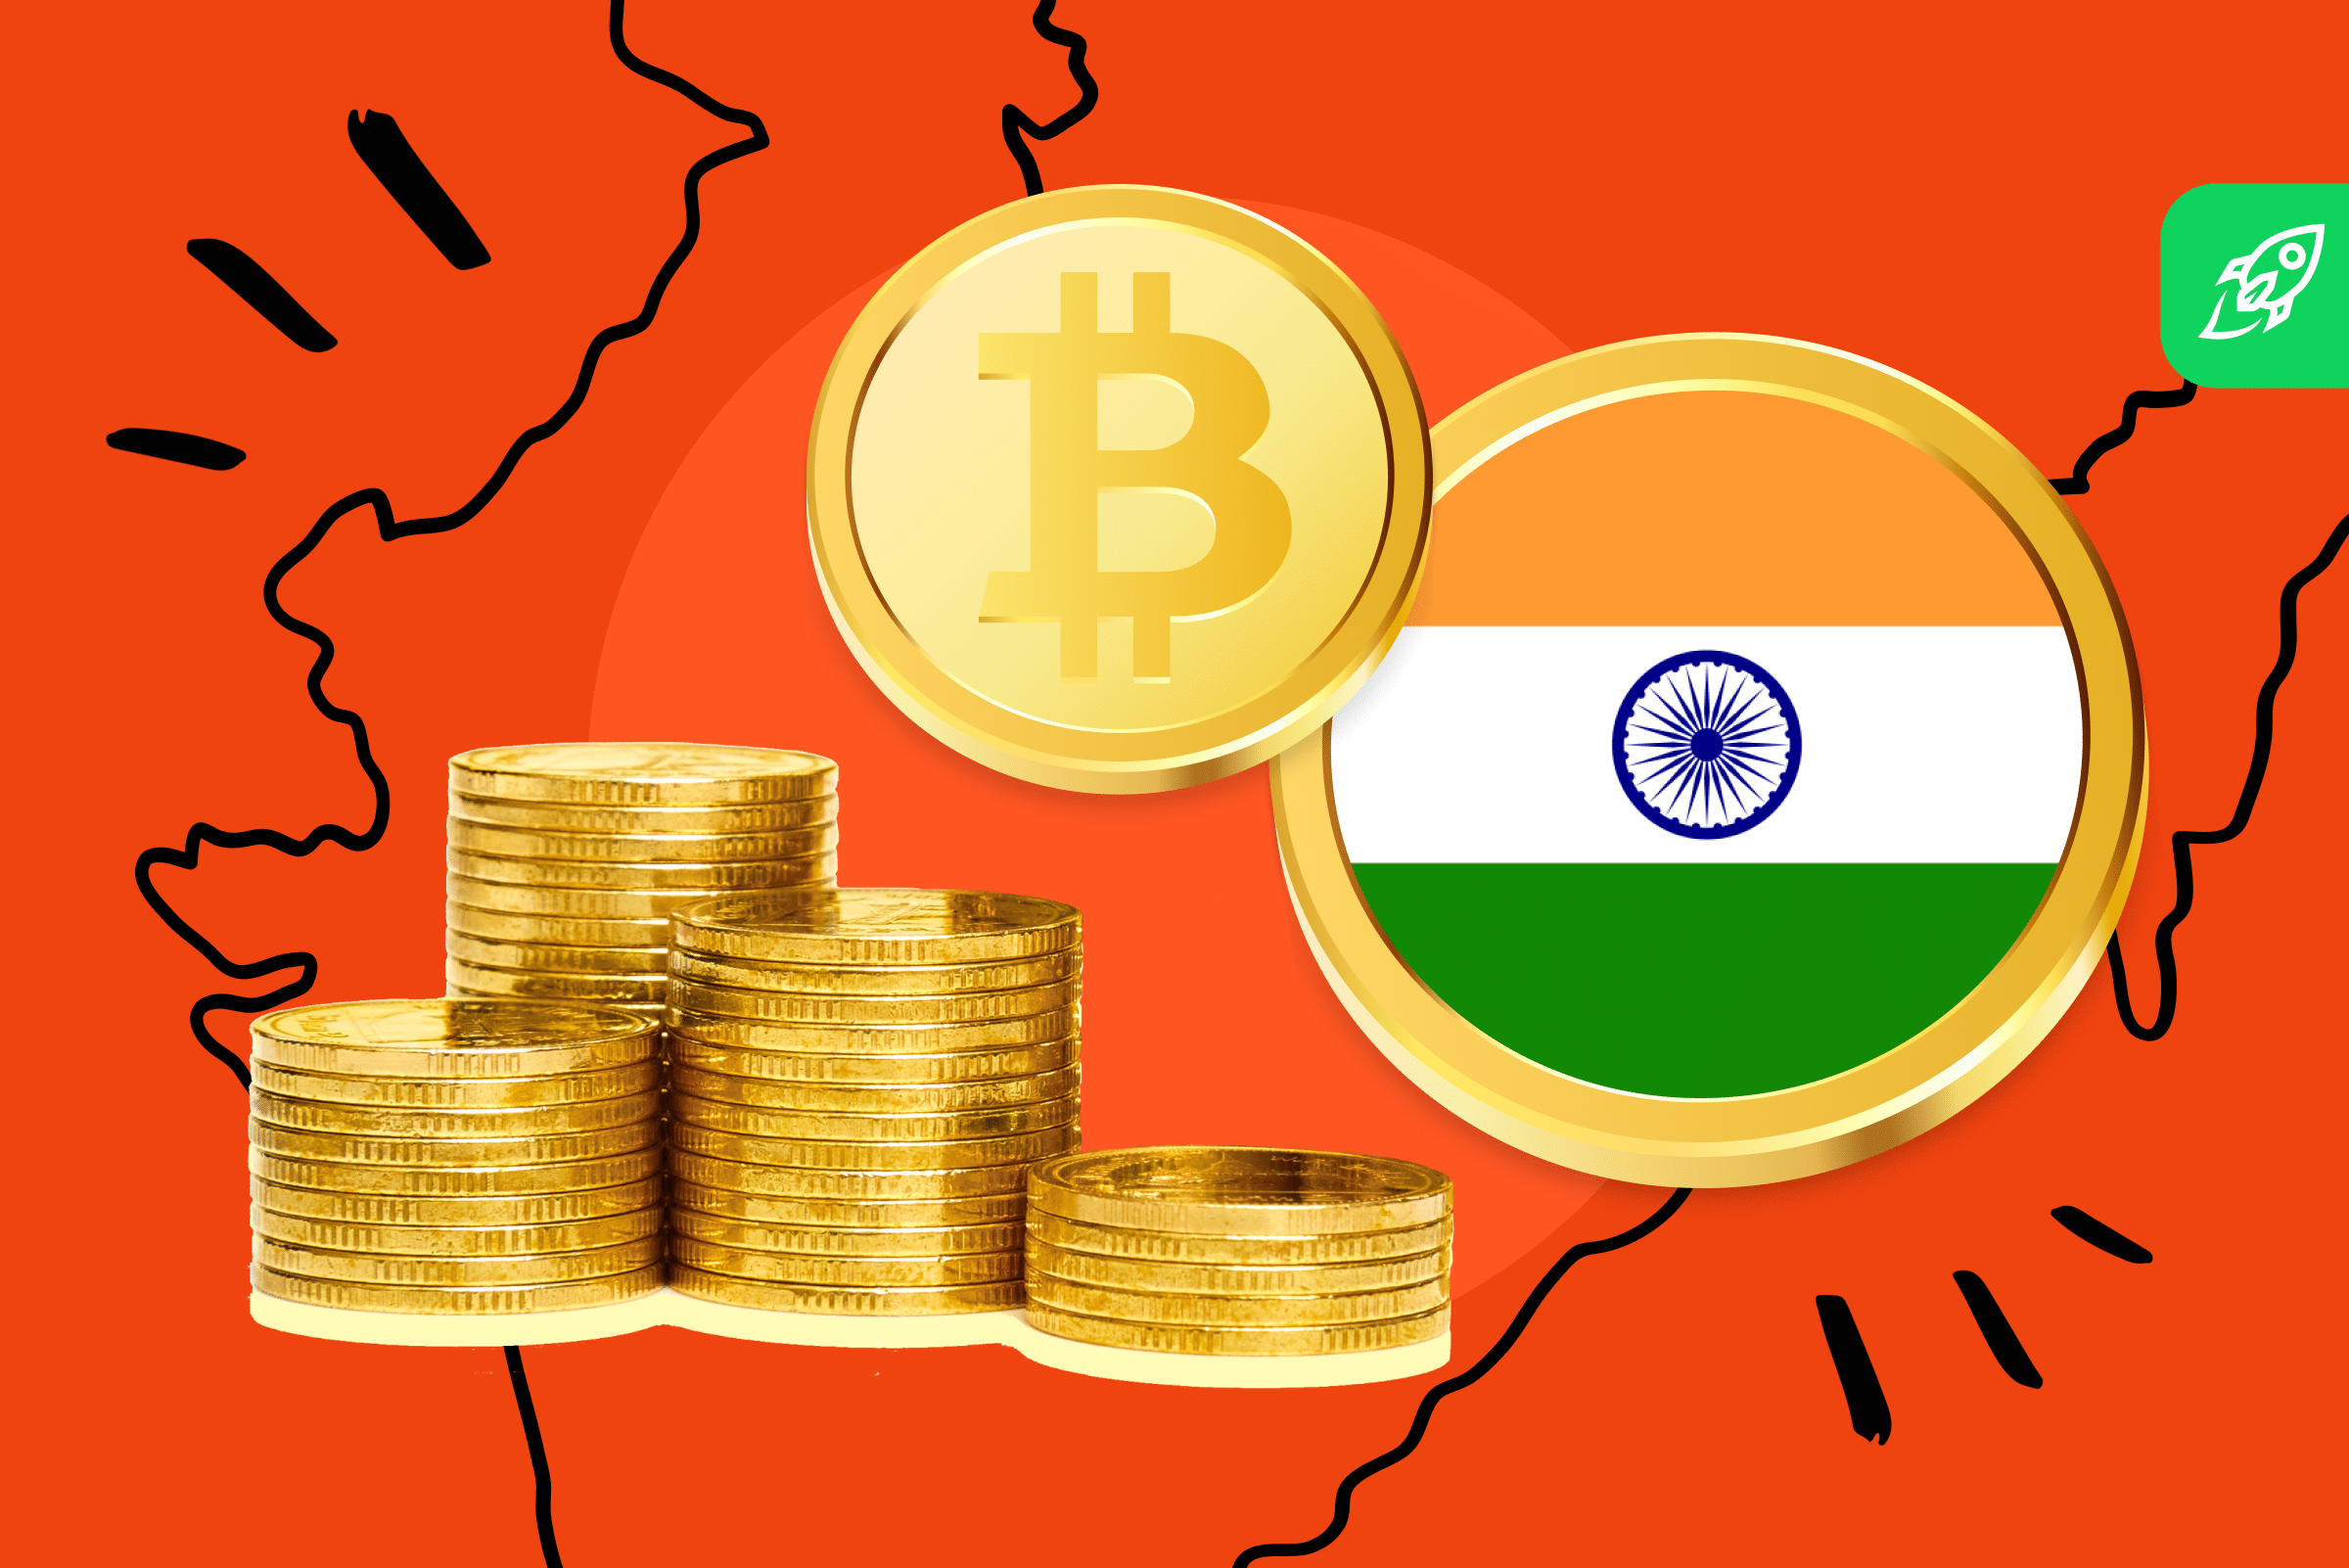 speech on cryptocurrency in india